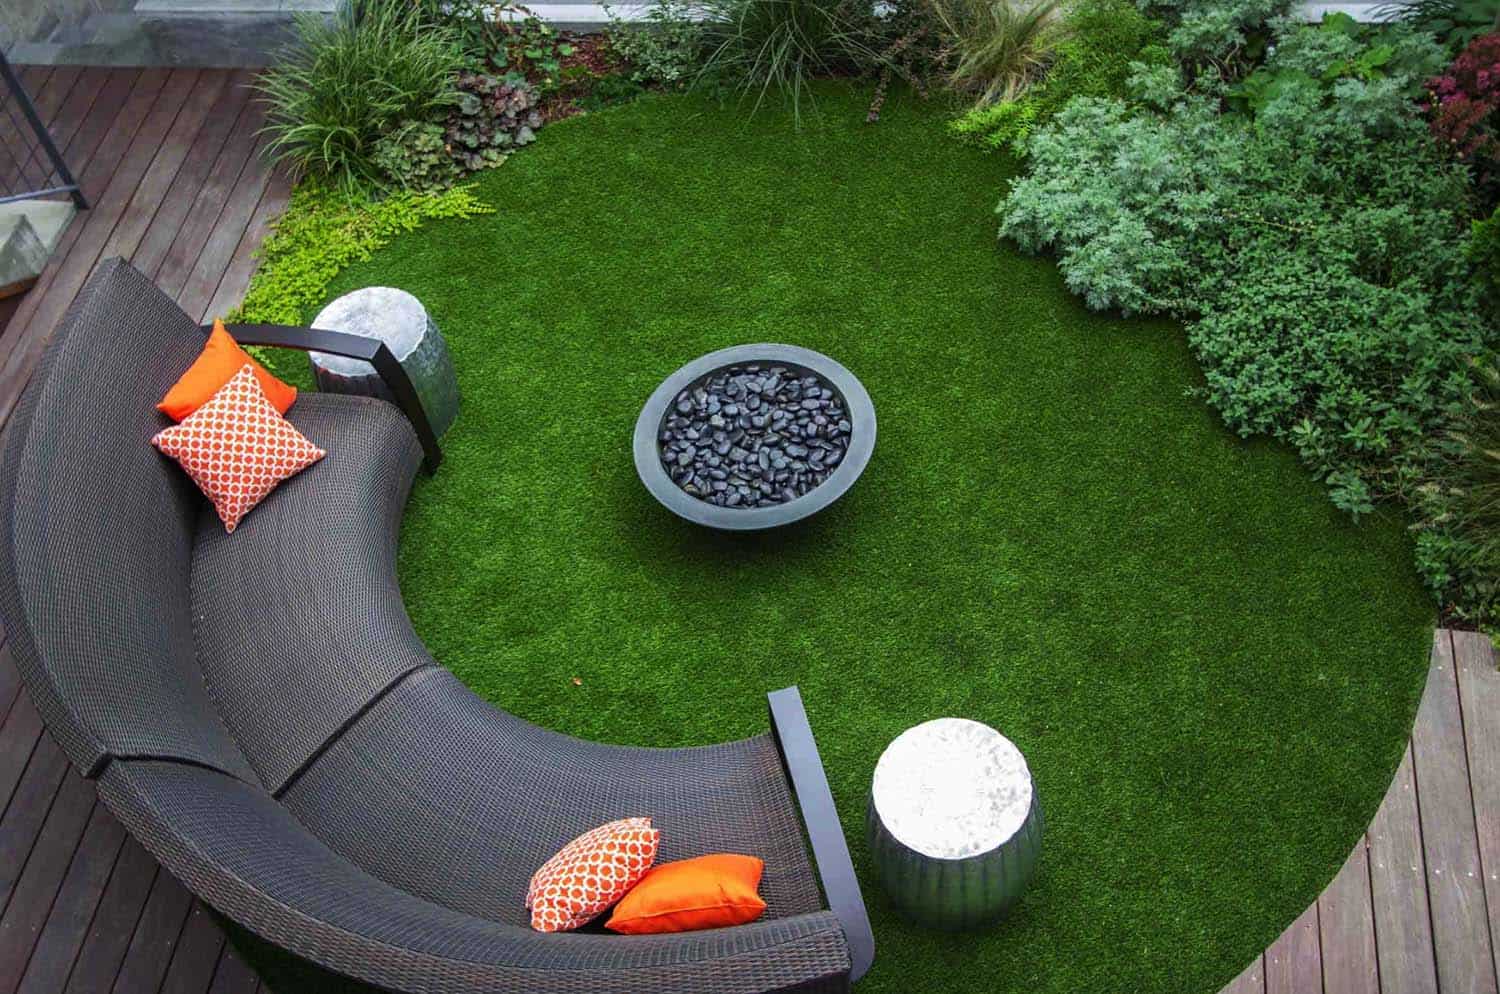 28 Inspiring Fire Pit Ideas To Create A, What To Put Under A Fire Pit On Grass